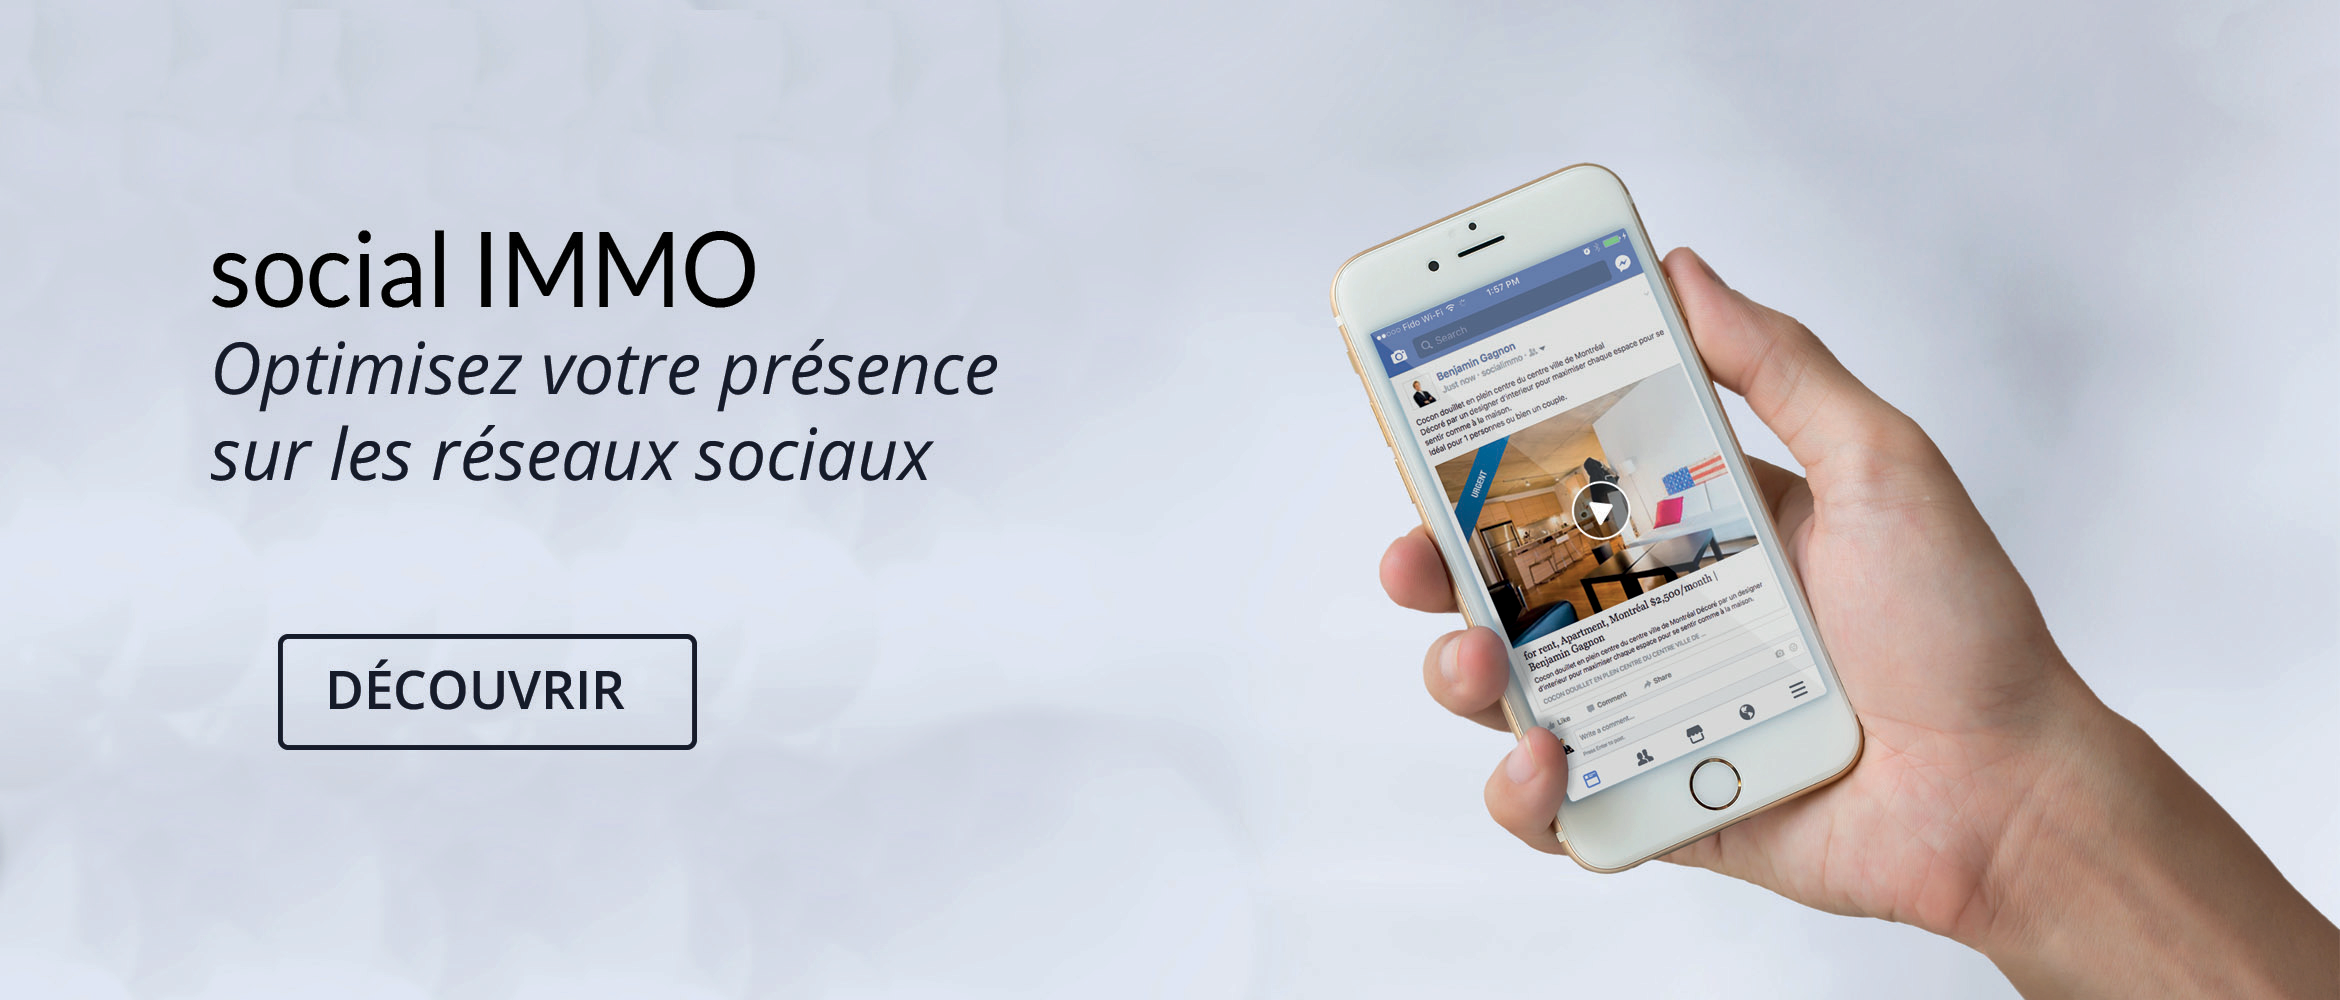 social IMMO arrive sur IMMO STORE !